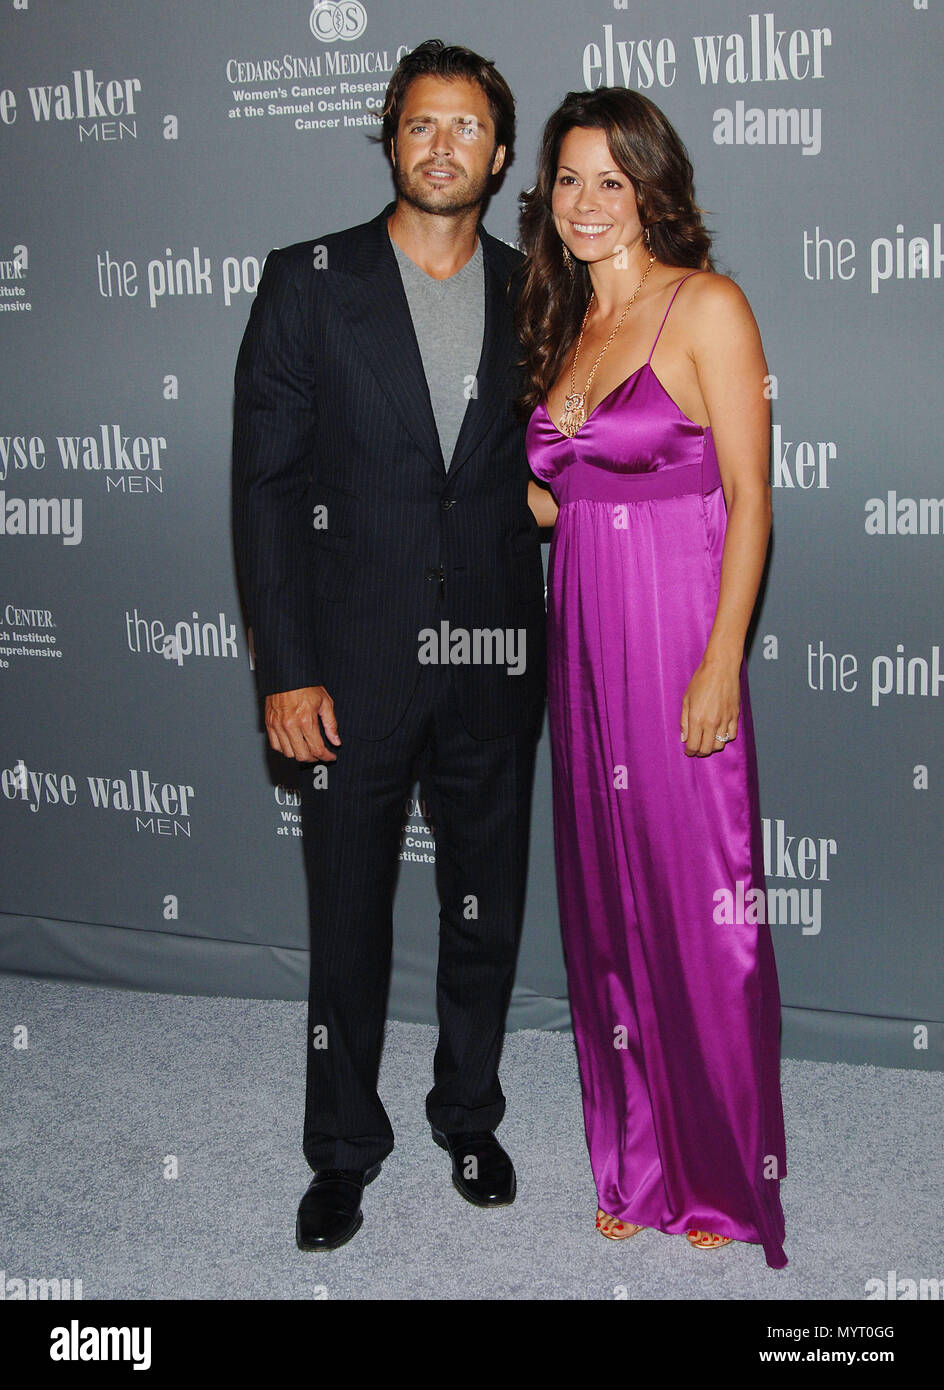 David Charvet and wife Brooke Burke  -  4TH Annual Pink Party To Benefit Cedars-SSinai's Women Cancer Research Institute at the Santa Monica Airport  In Los Angeles.  full length smile CharvetDavid BurkeBrooke 53  Event in Hollywood Life - California, Red Carpet Event, USA, Film Industry, Celebrities, Photography, Bestof, Arts Culture and Entertainment, Celebrities fashion, Best of, Hollywood Life, Event in Hollywood Life - California, Red Carpet and backstage, Music celebrities, Topix, Couple, family ( husband and wife ) and kids- Children, brothers and sisters inquiry tsuni@Gamma-USA.com, Cr Stock Photo